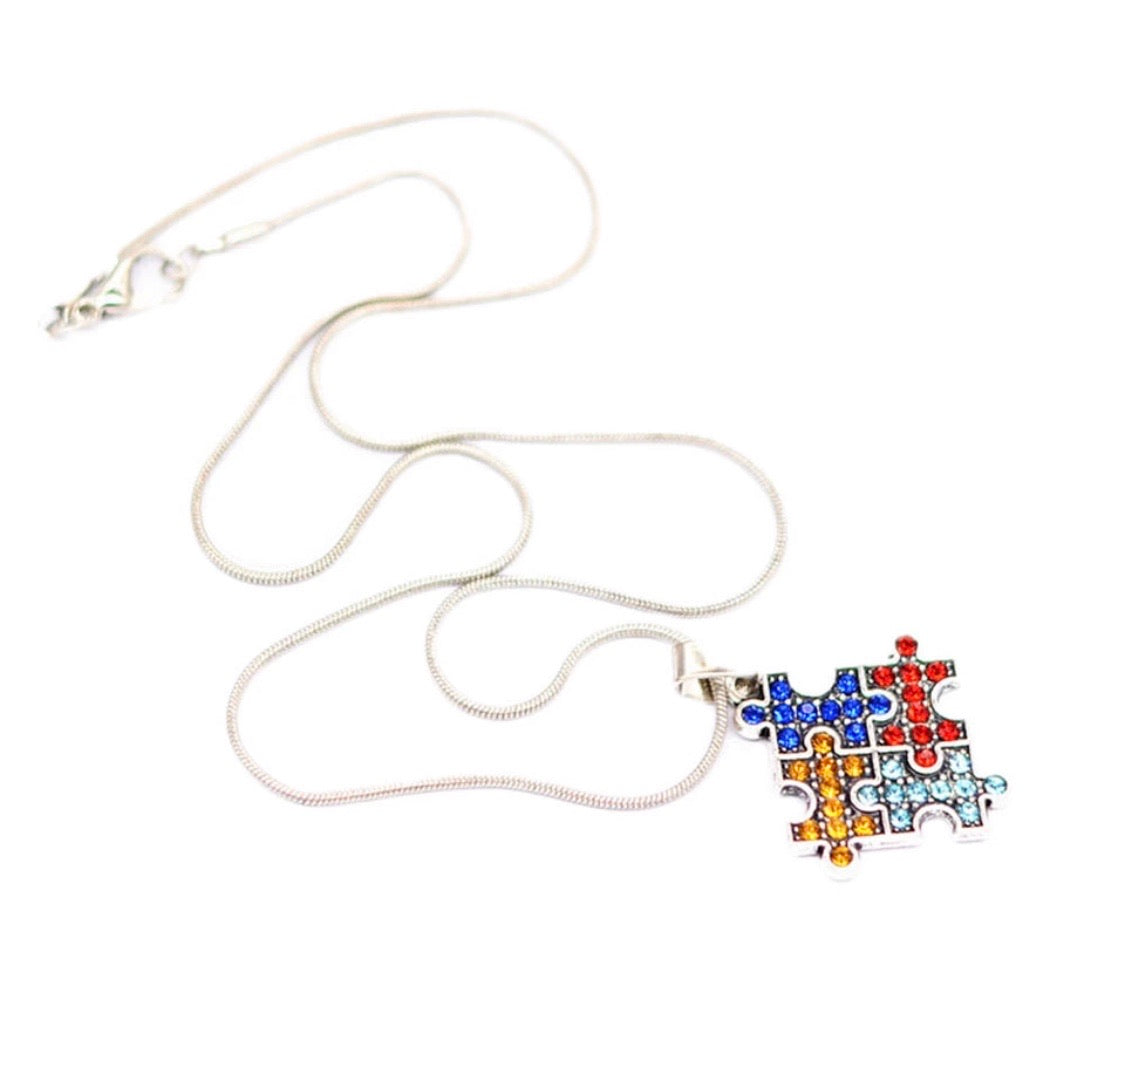 Necklace { Autism } Puzzle pieces • Silver • Rhinestones • 20 inches • $5 jewelry - Stacy's Pink Martini Boutique